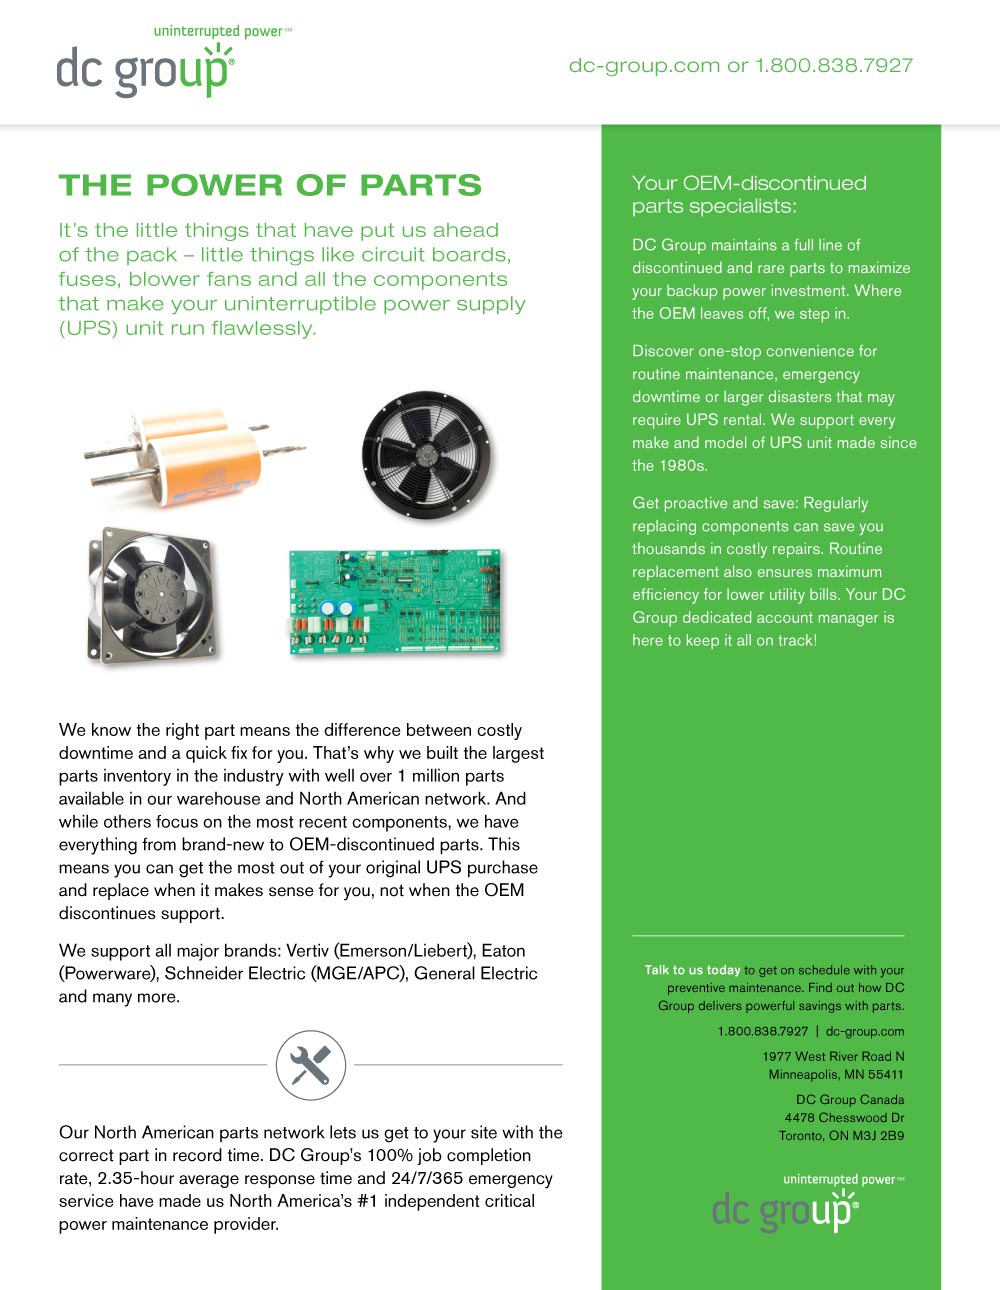 The Power of Parts FACT SHEET